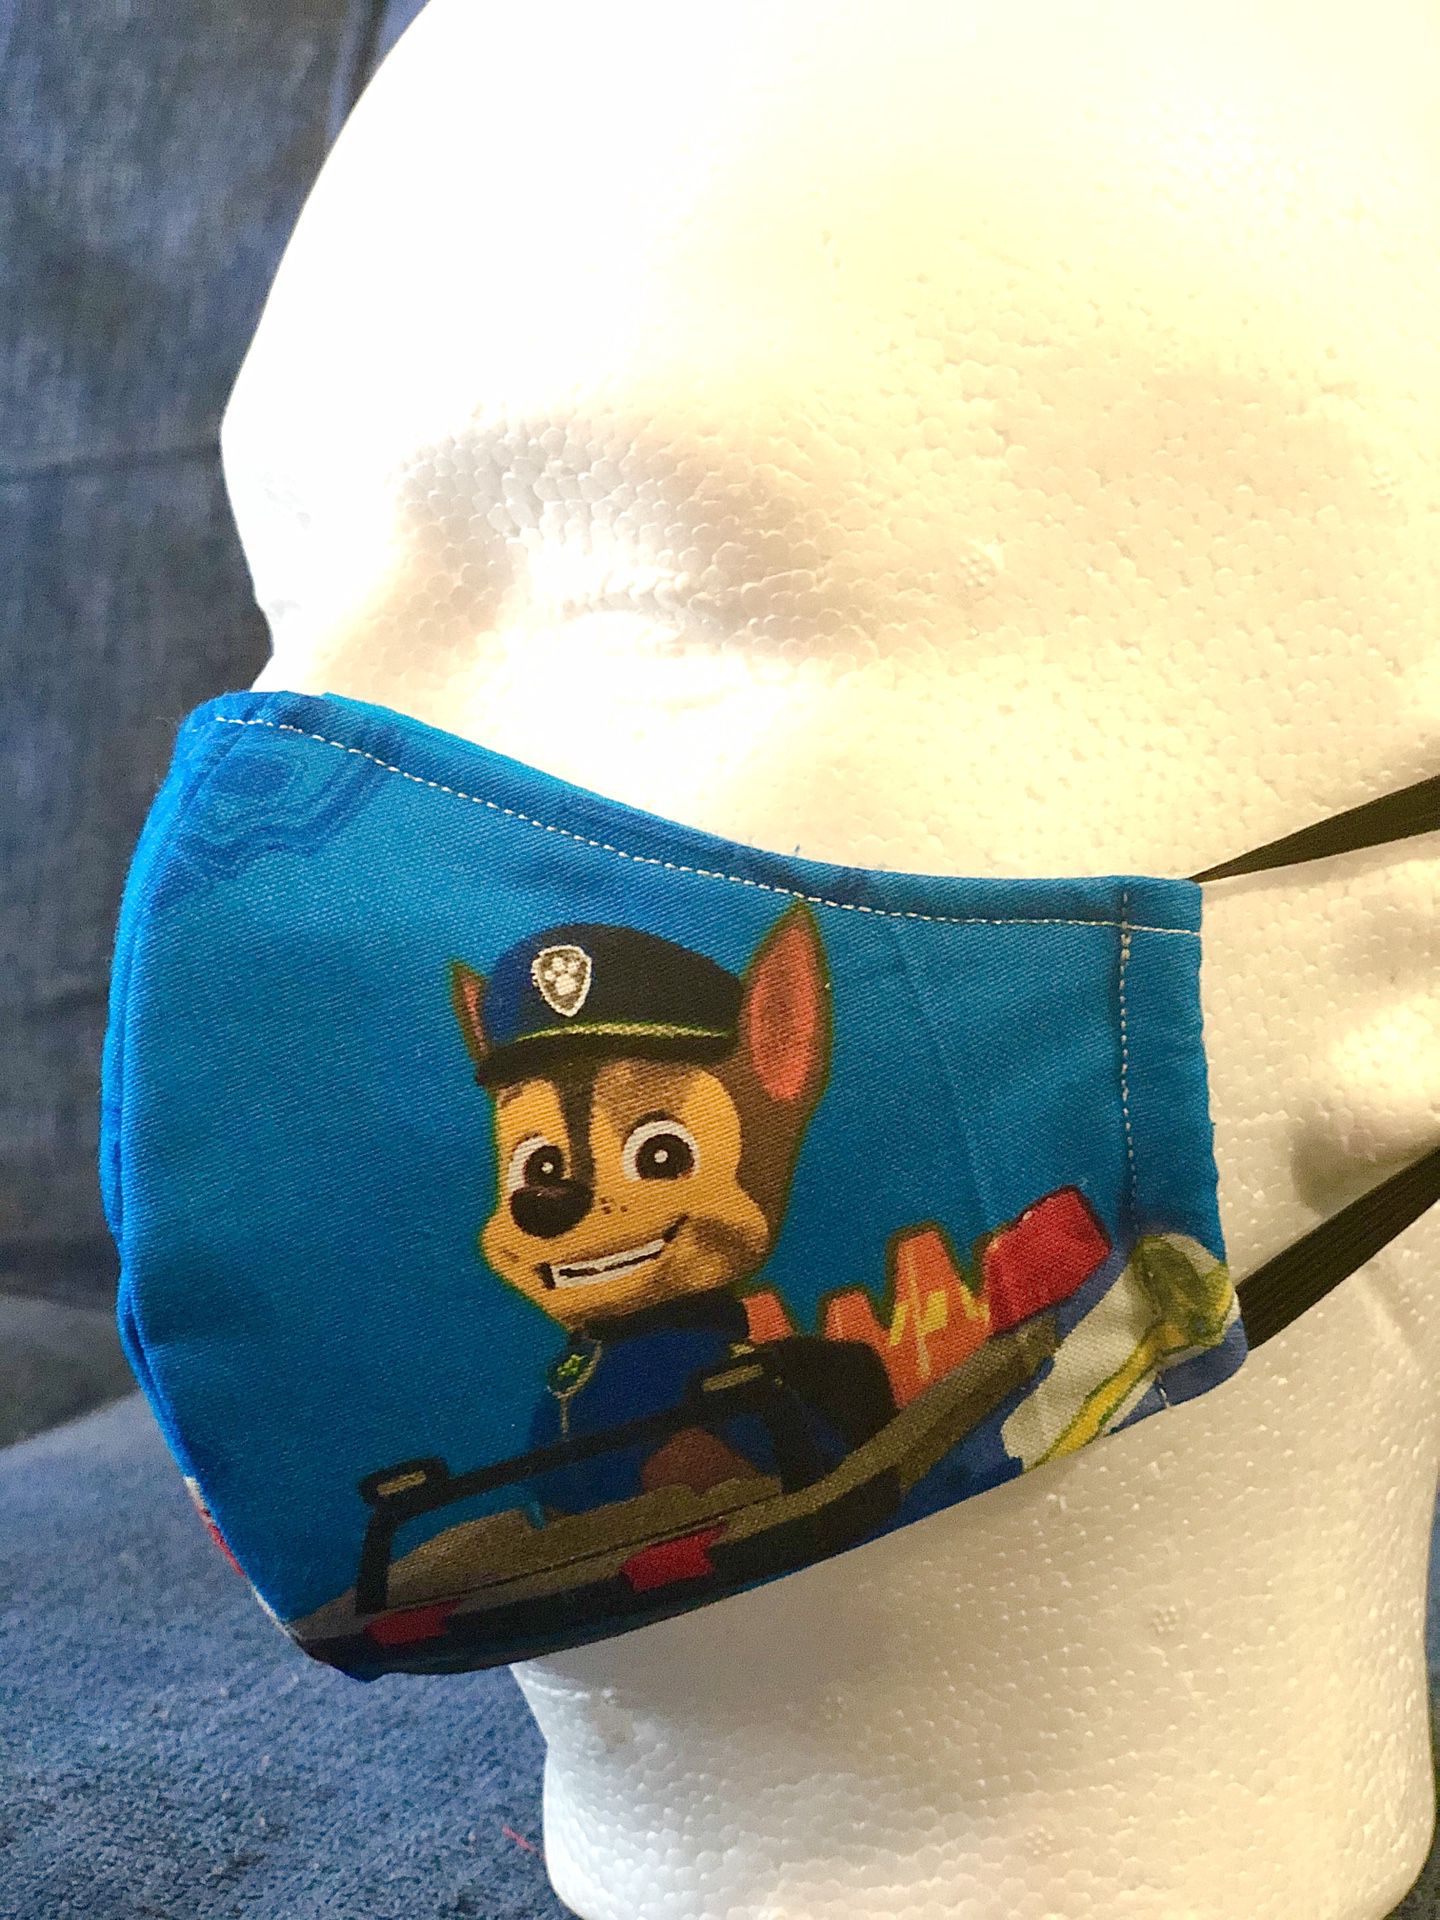 Handmade Masks Paw Patrol. 100% Cotton. Reusable. 3M Filter. 5 Layers of Protection and comfort